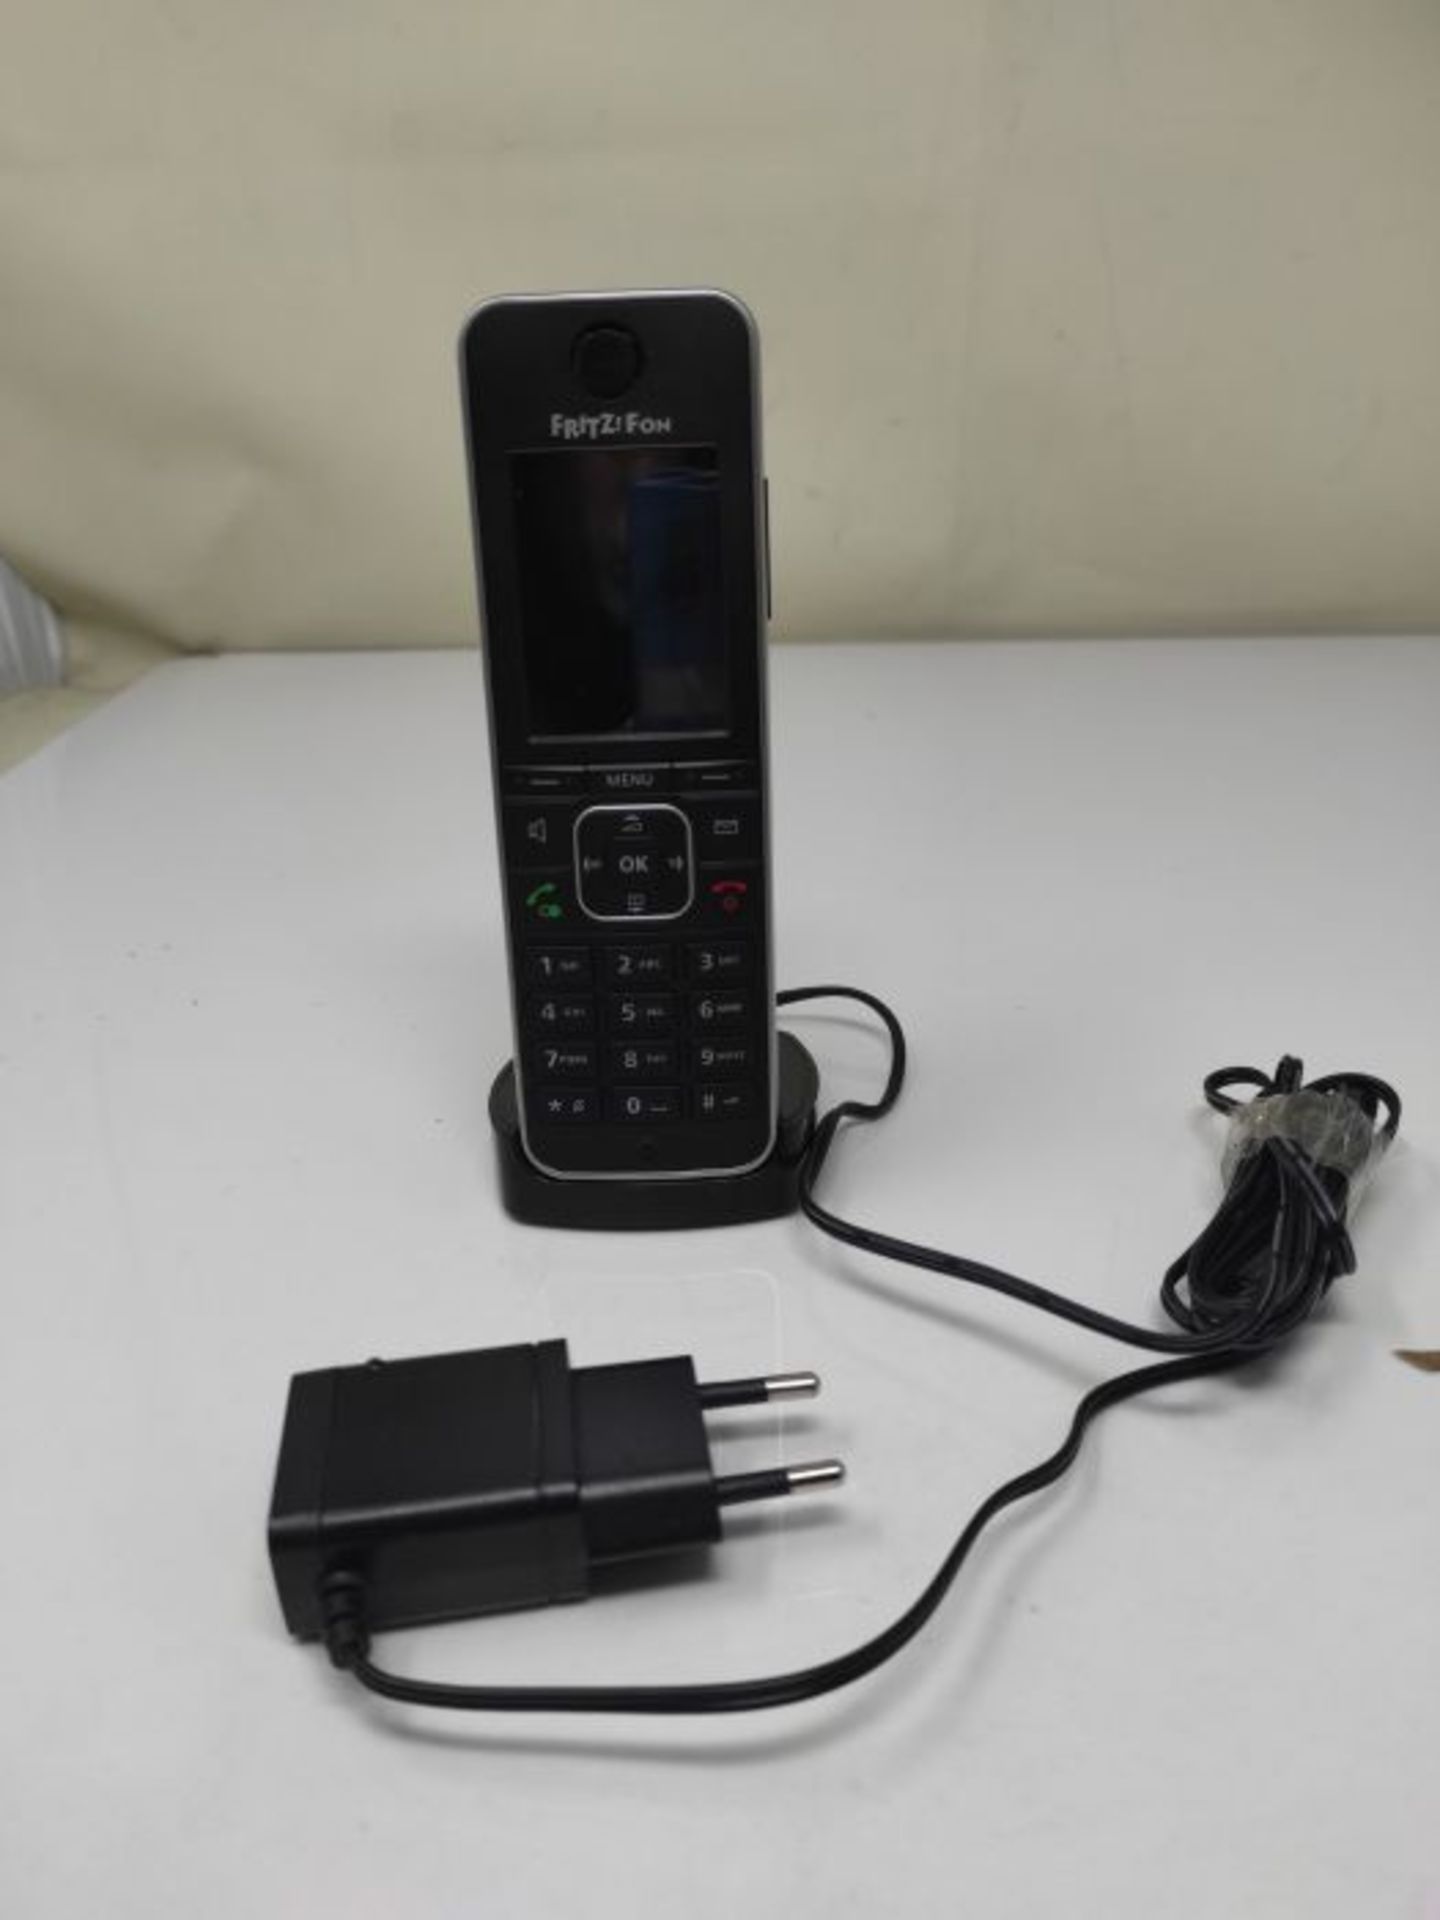 RRP £59.00 AVM FRITZ!Fon C6 Black DECT comfort telephone (high-quality color display, HD telephon - Image 3 of 3